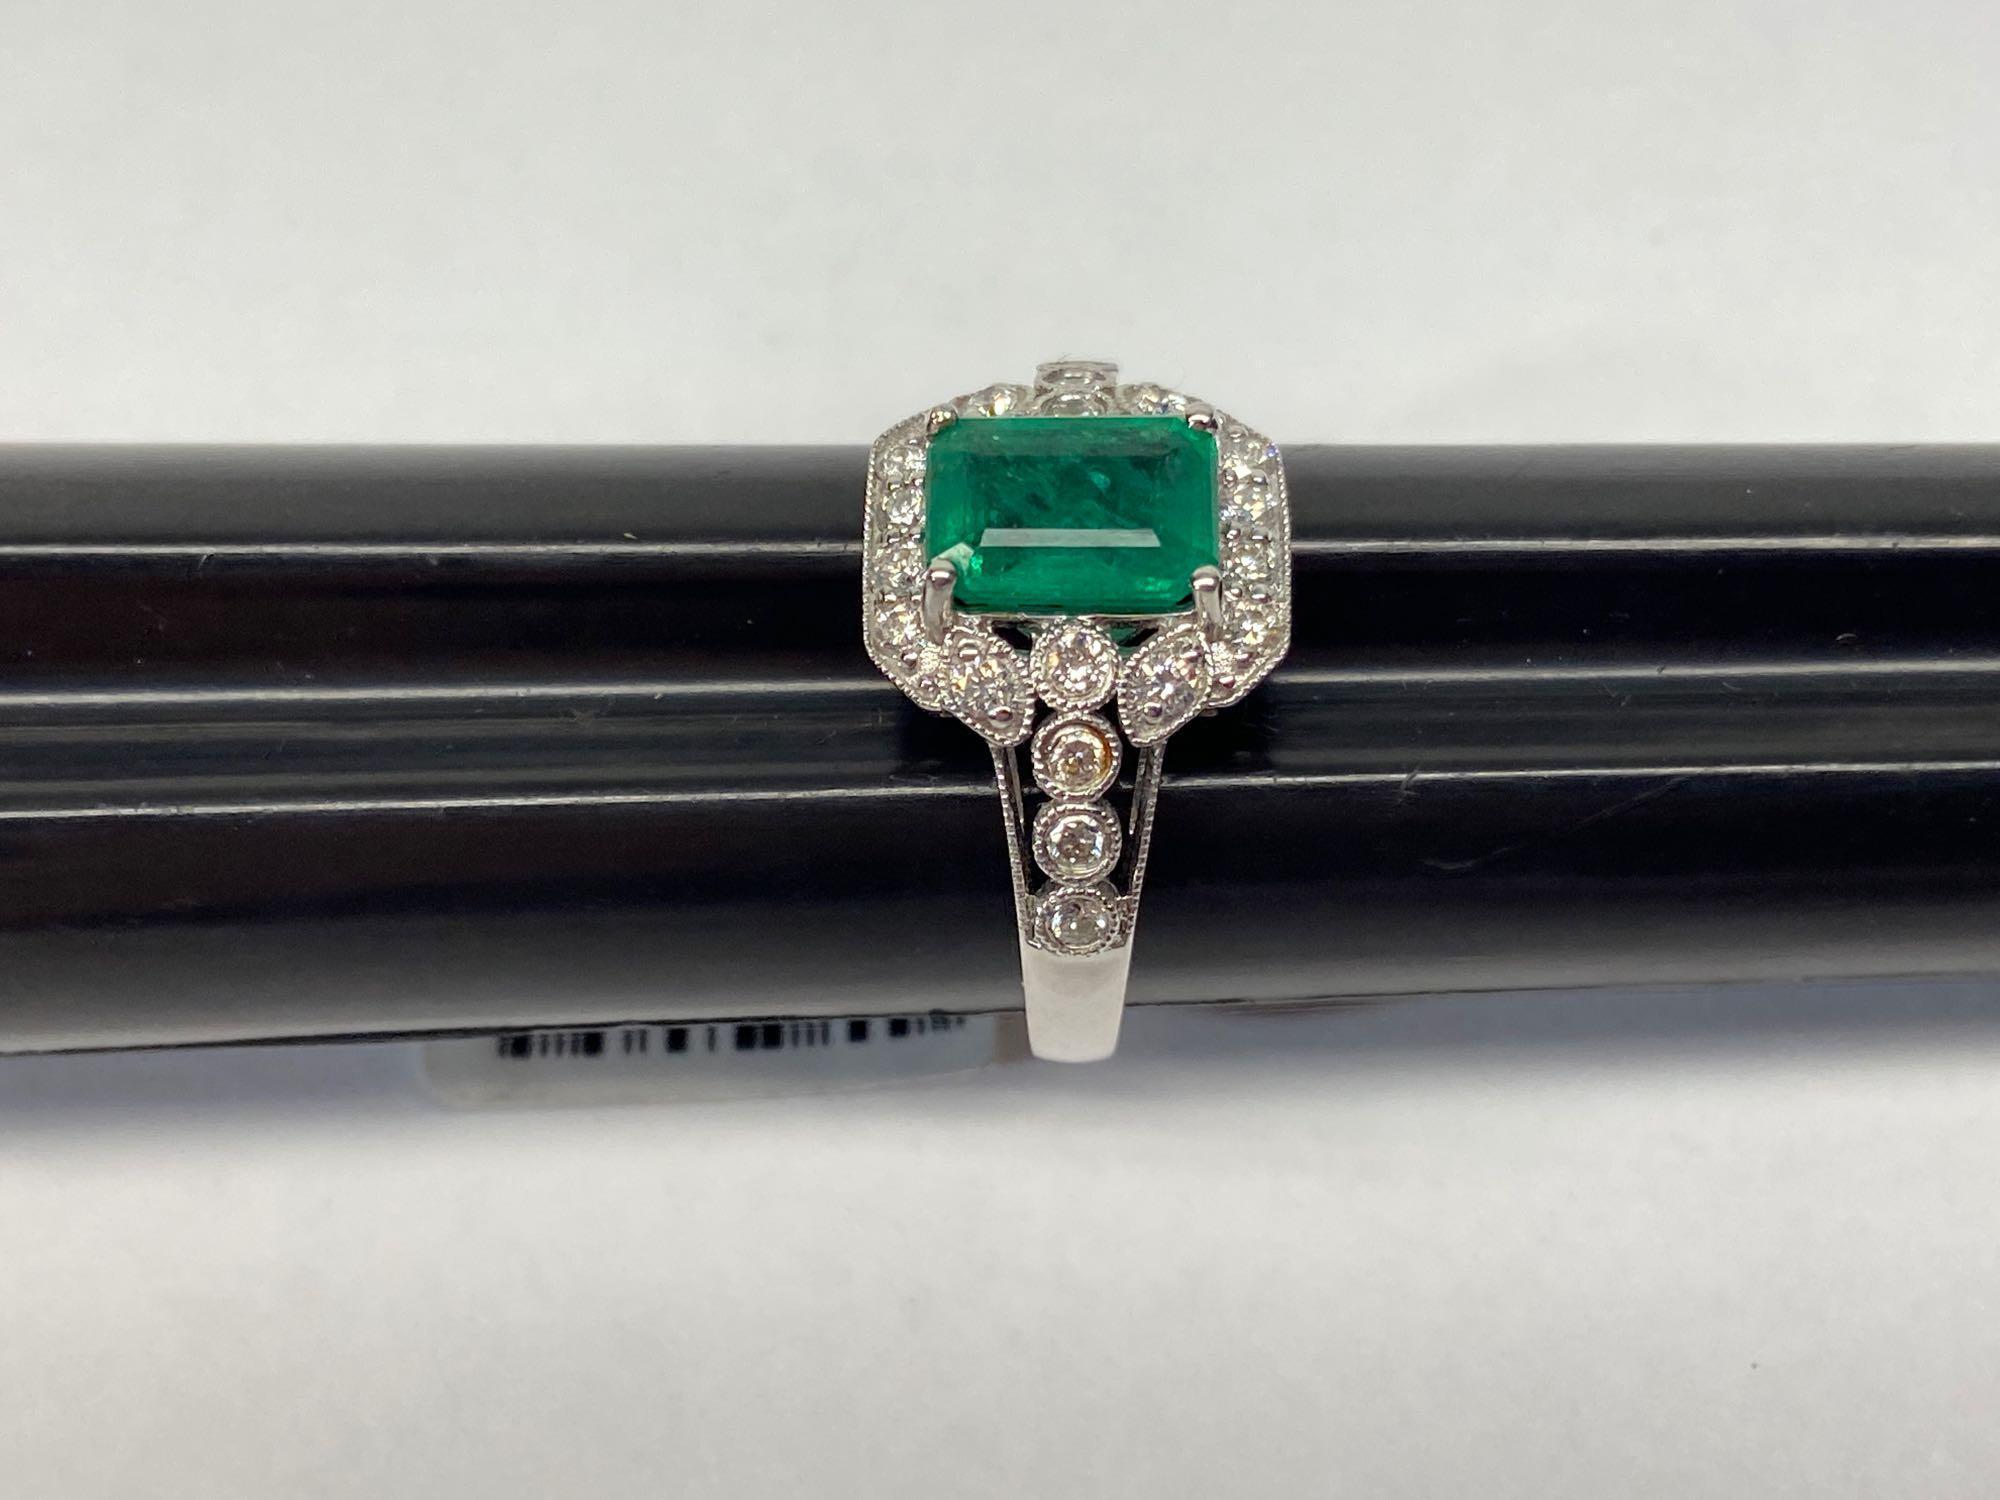 1.39ct Emerald, 0.39ct Diamonds, 18K White Gold Ring, Size 7, Certified & Graded by AIG